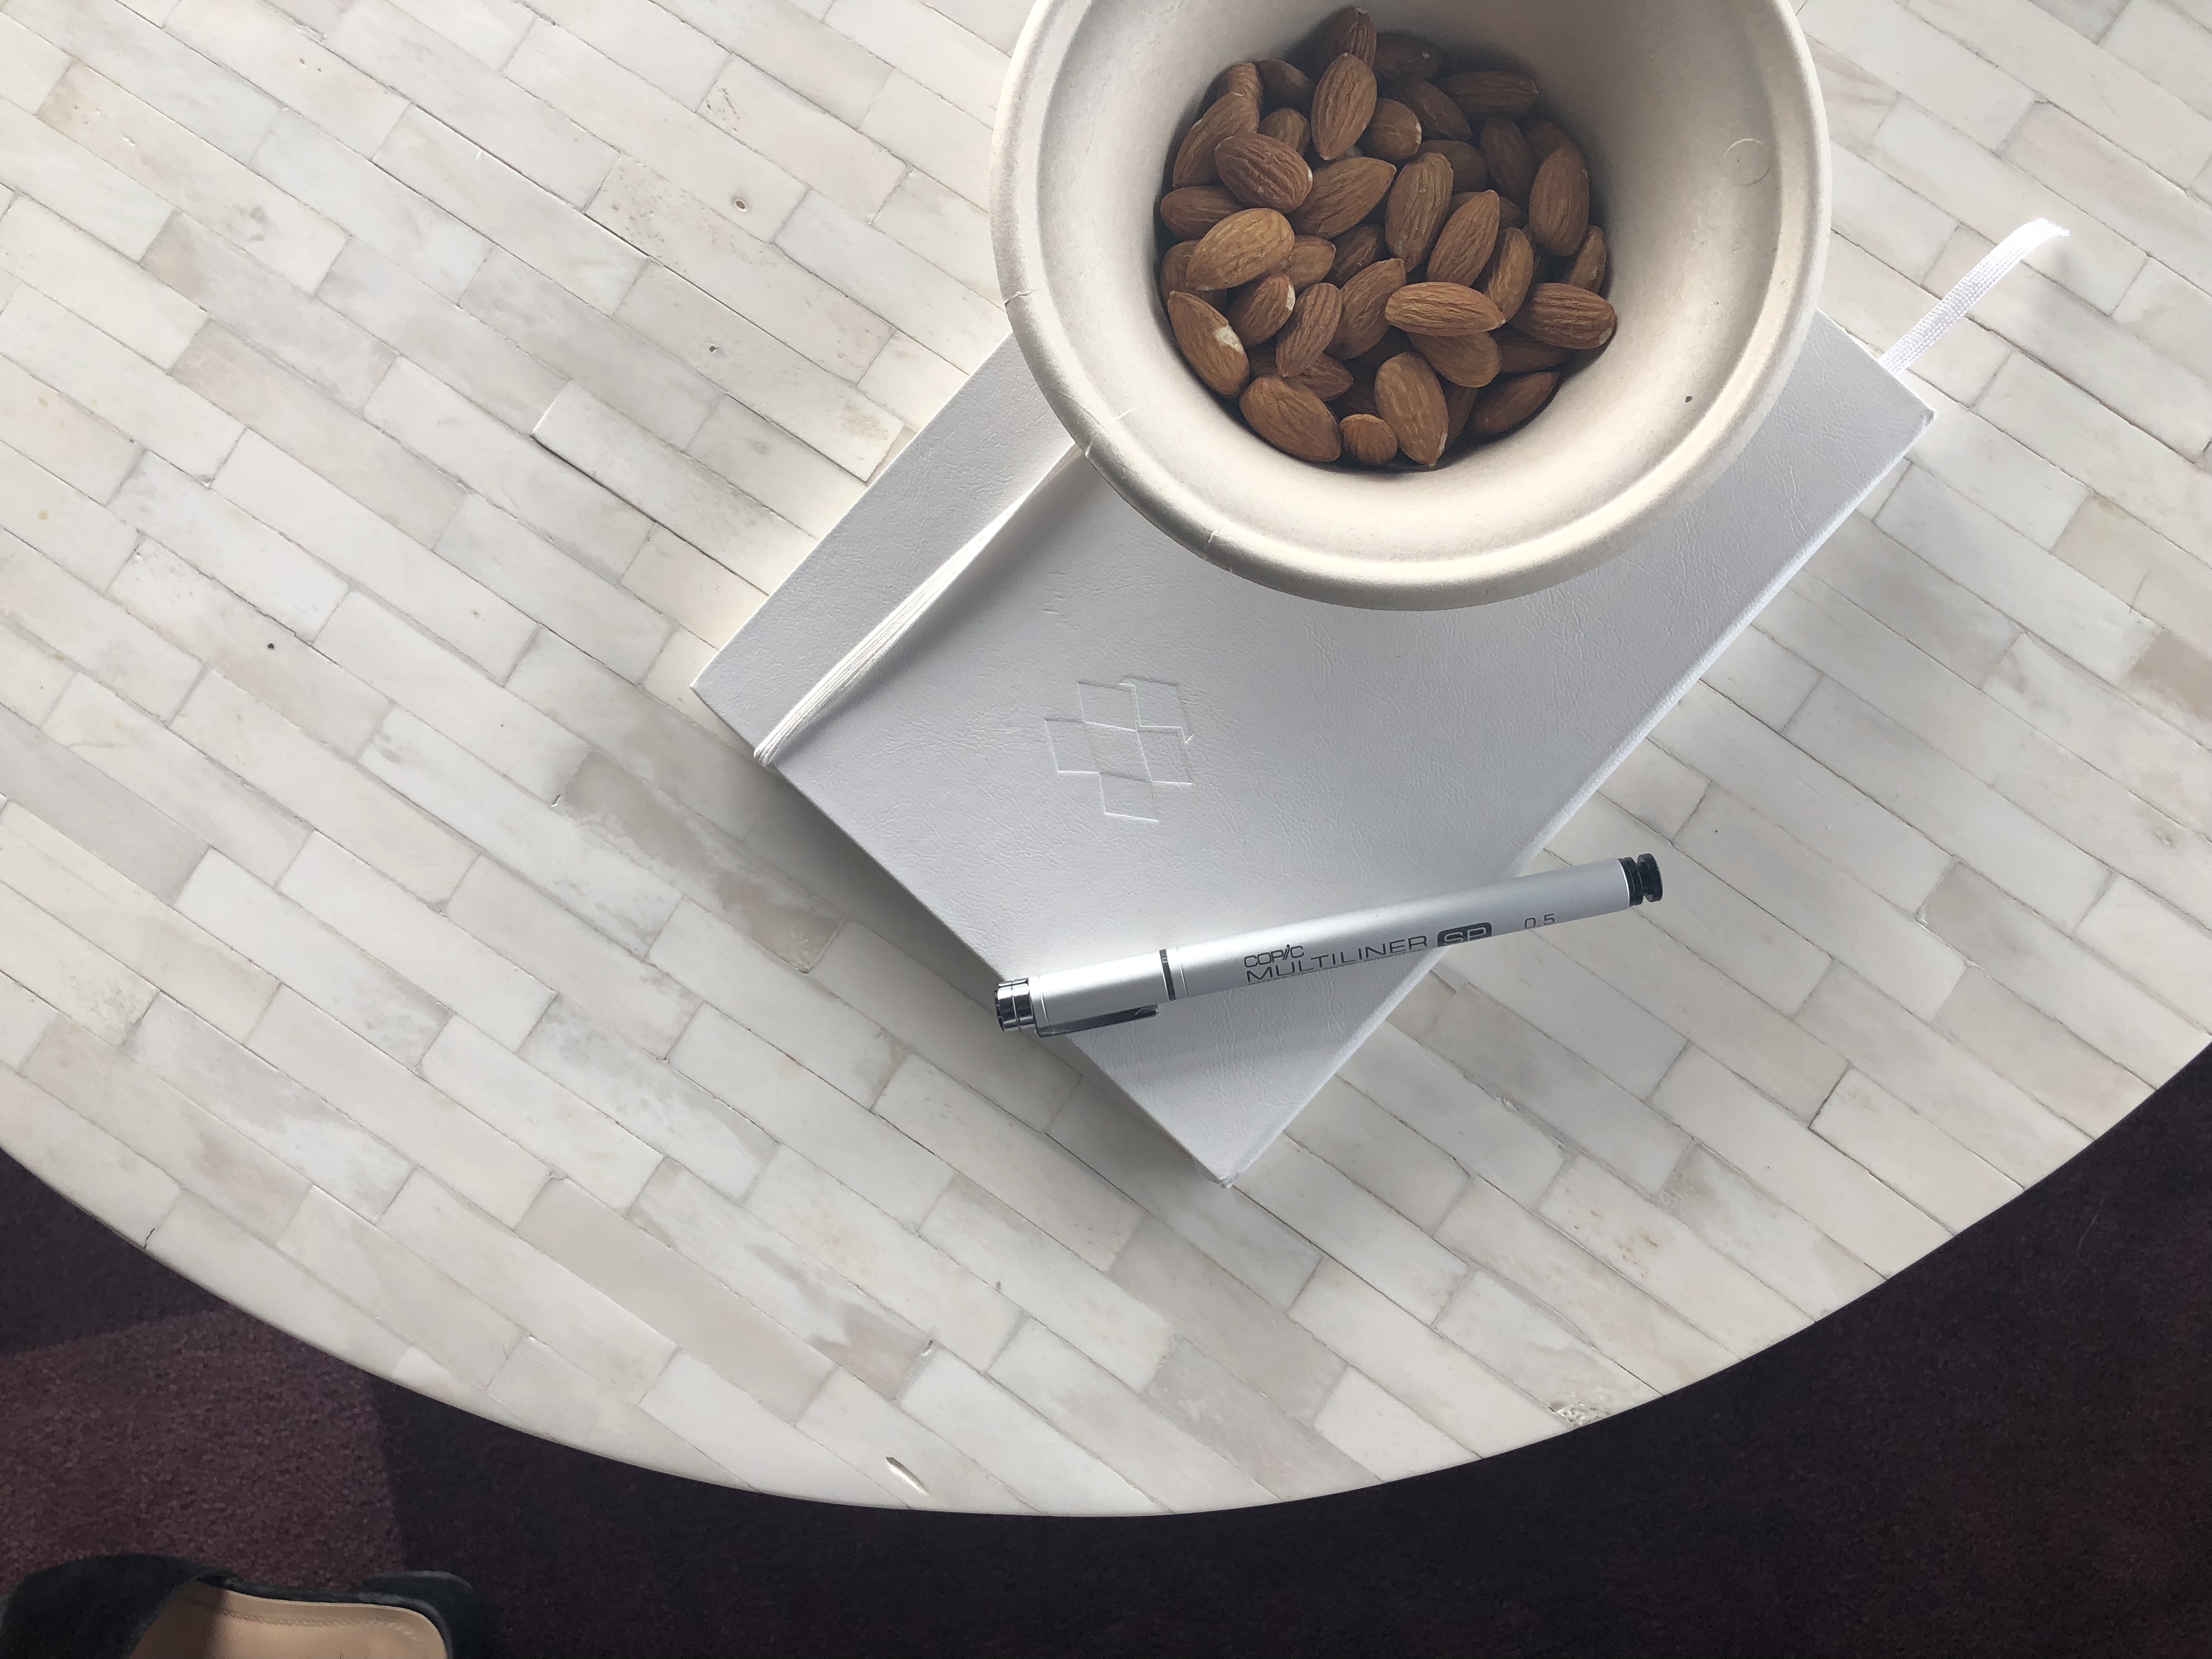 Almonds in a paper cup on a white notebook embossed with Dropbox's logo.